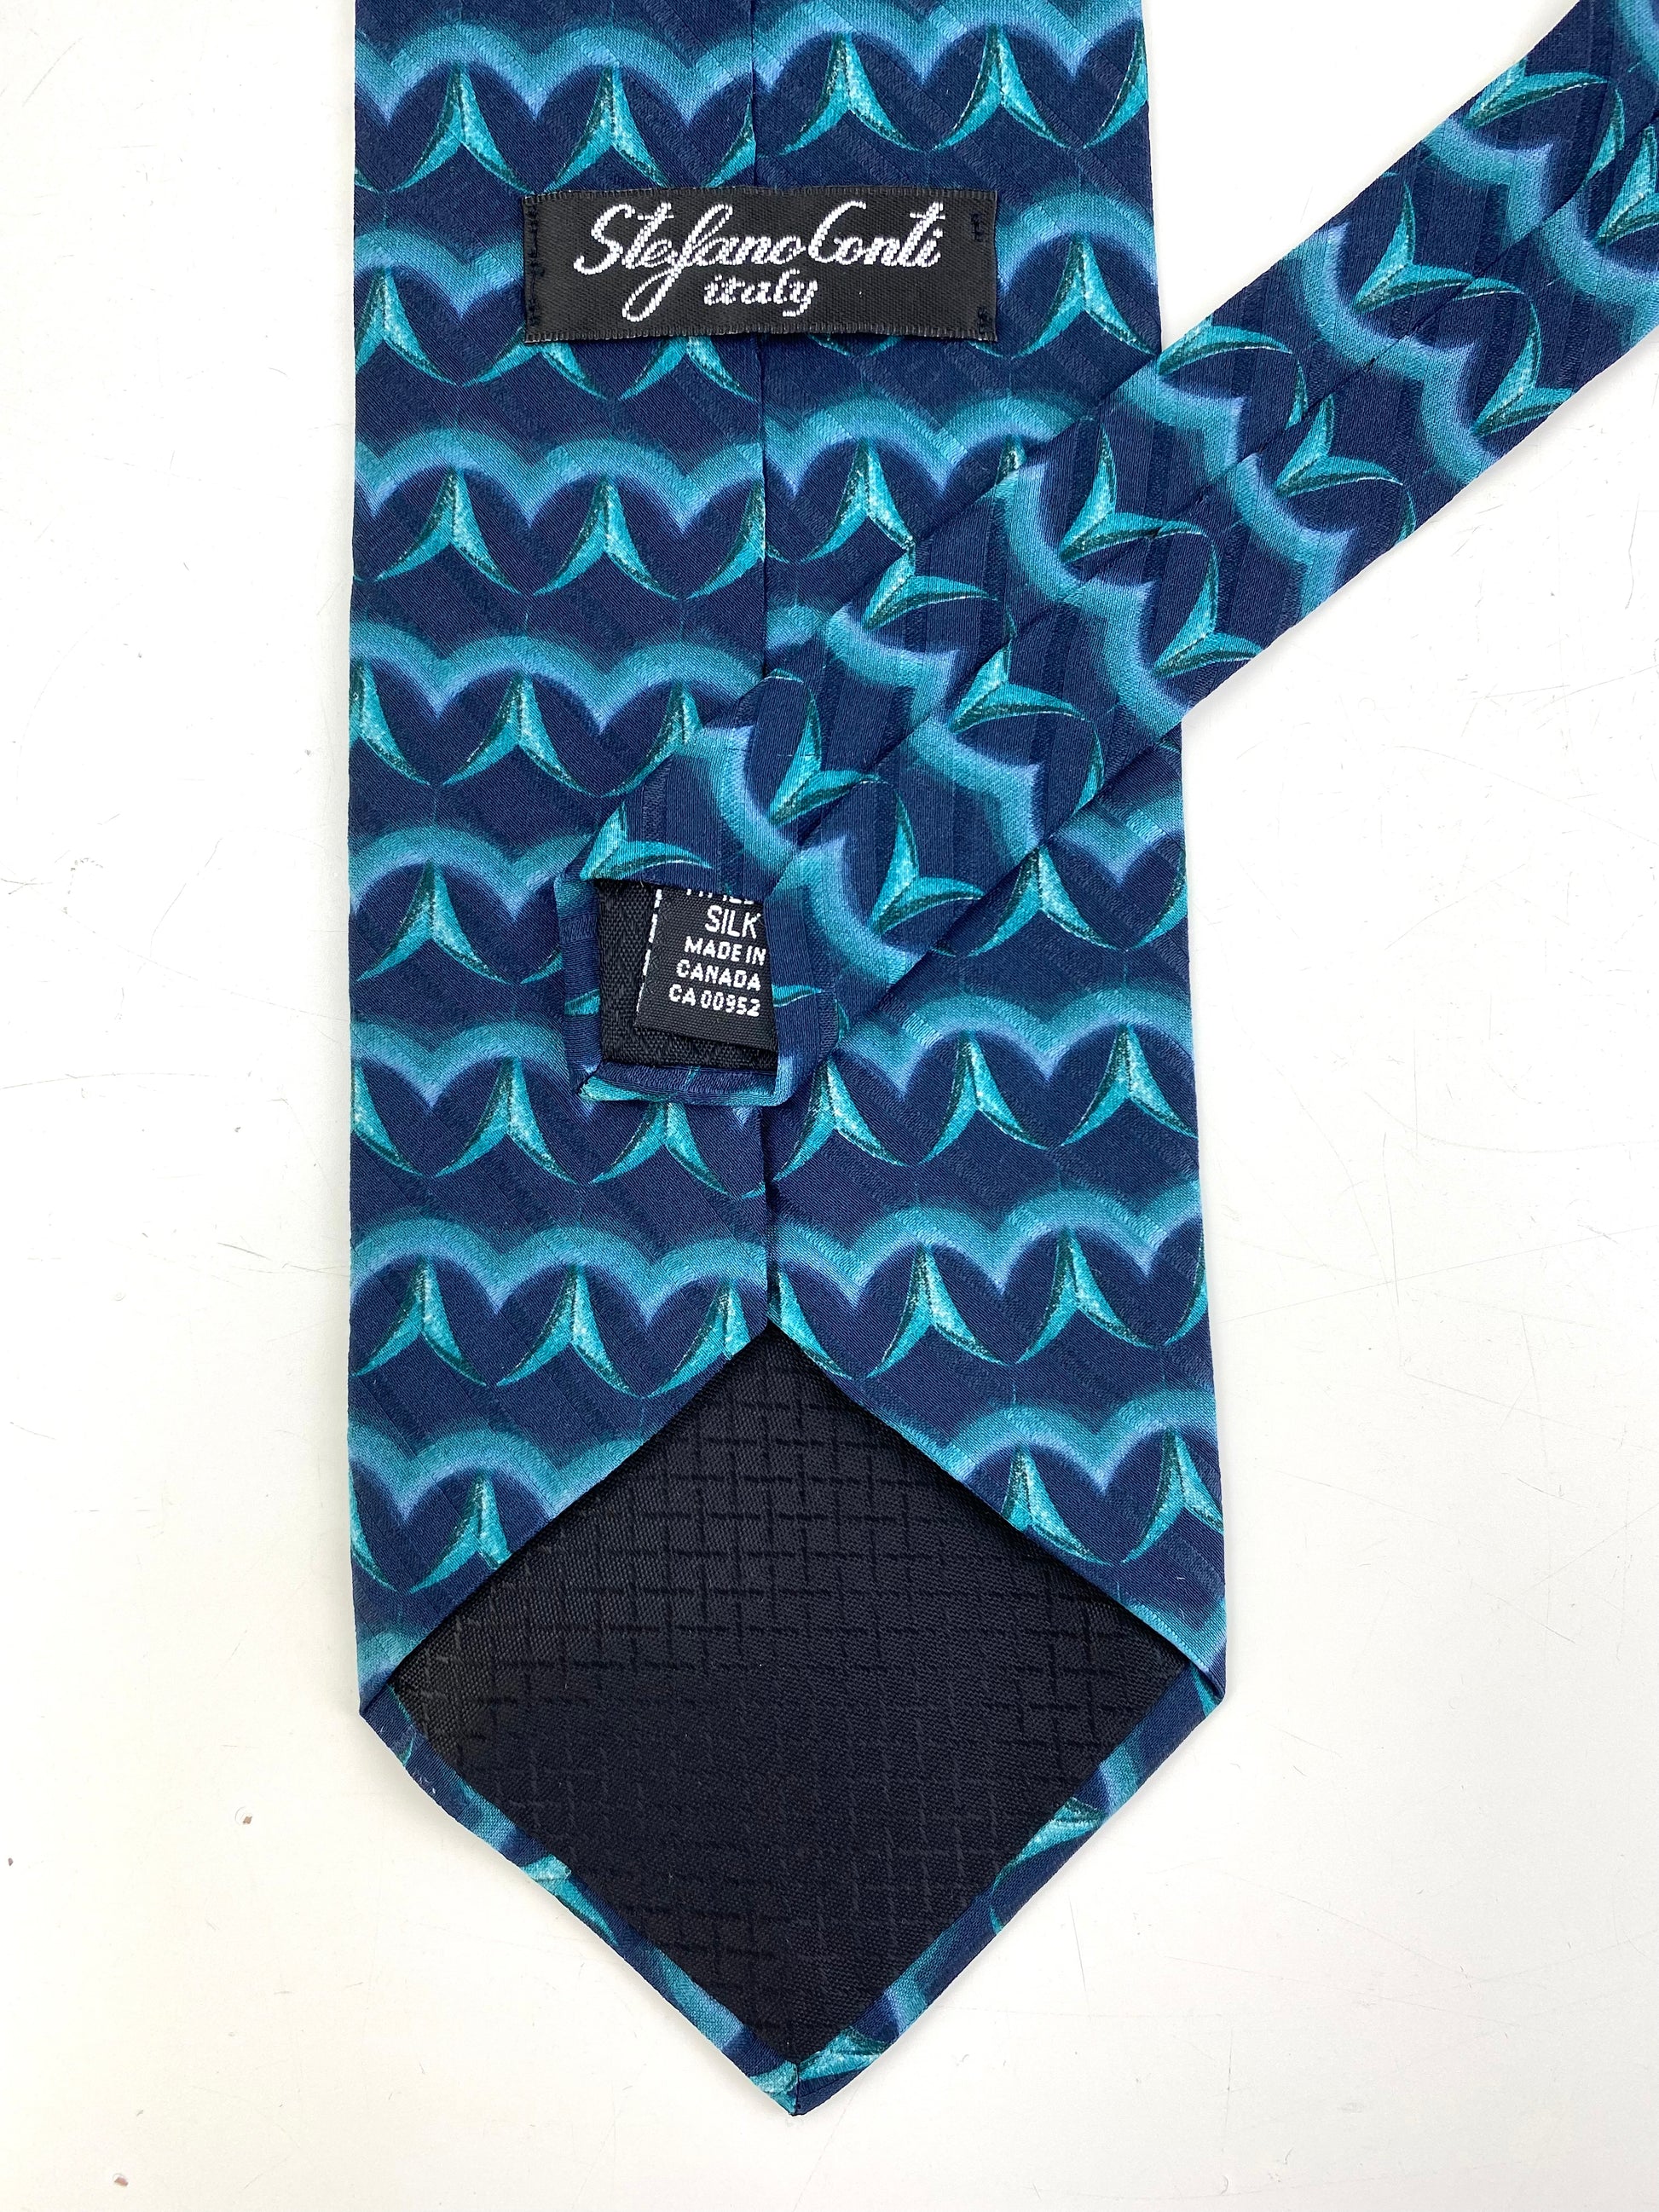 Back and labels of: 90s Deadstock Silk Necktie, Men's Vintage Teal Blue Abstract Pattern Tie, NOS